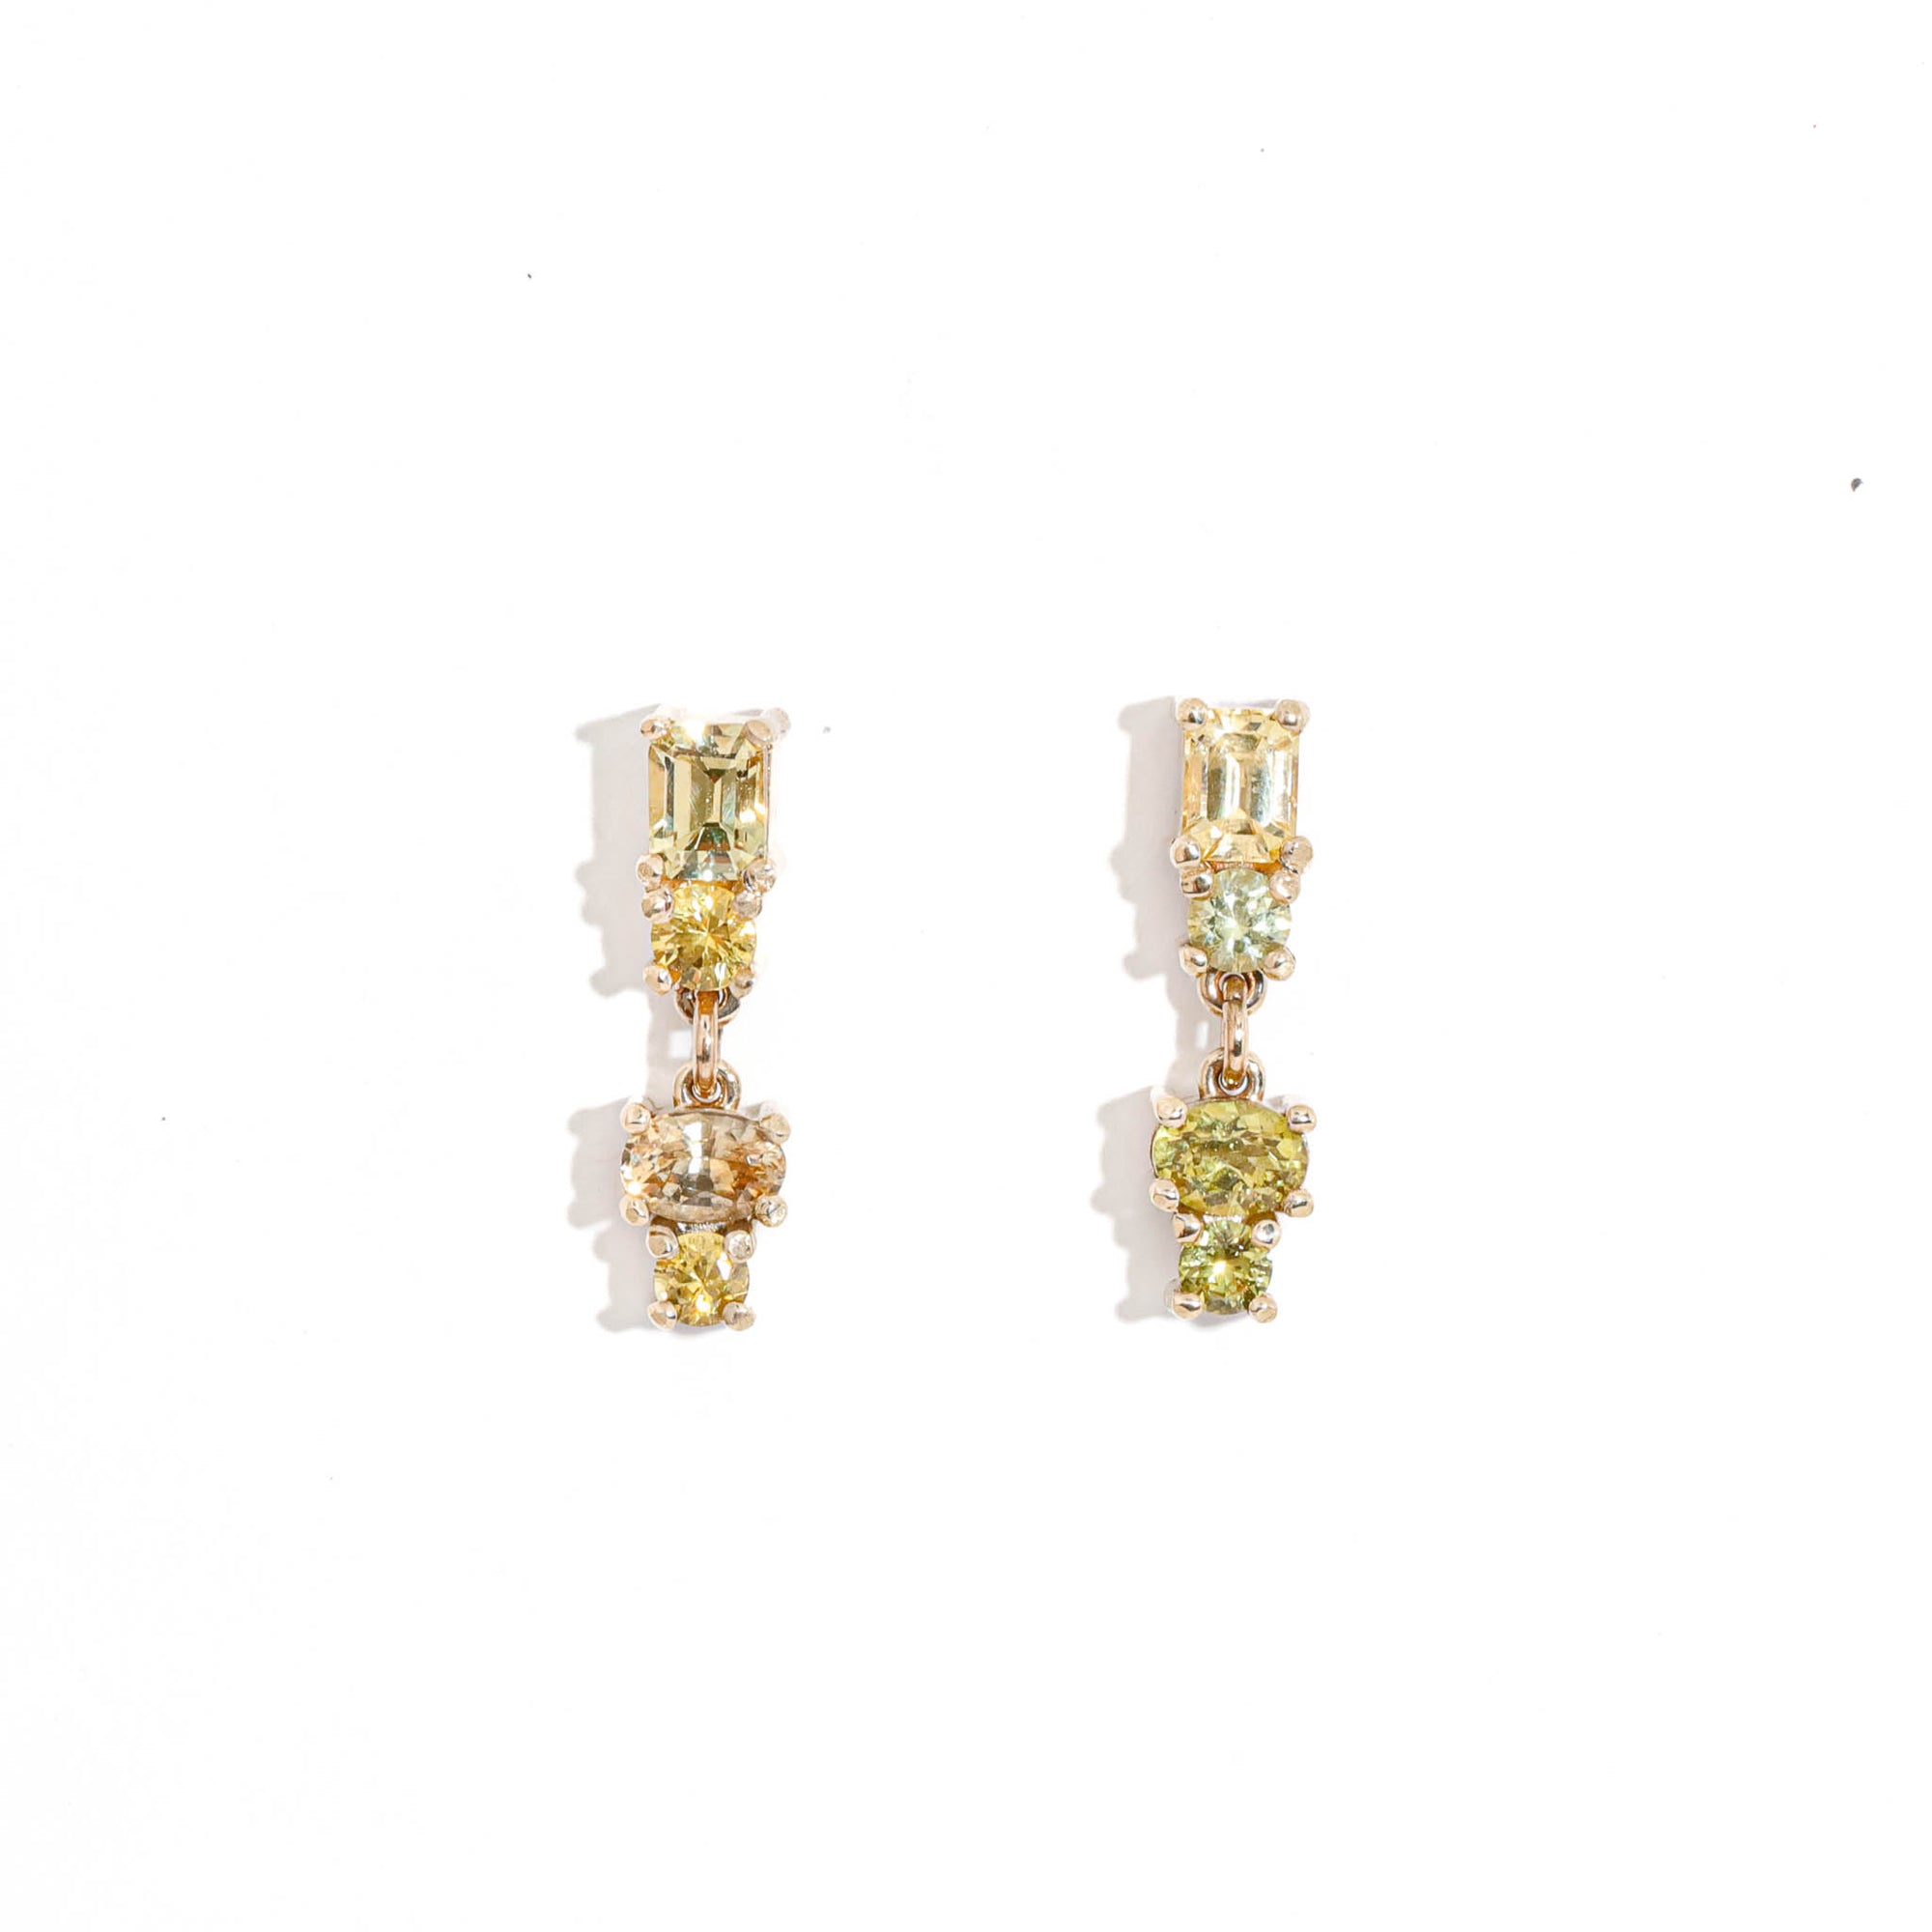  Emerald Cut and Round Brilliant Cut and Oval Cut Yellow Sapphire Drop Earrings in 9 Carat Yellow Gold